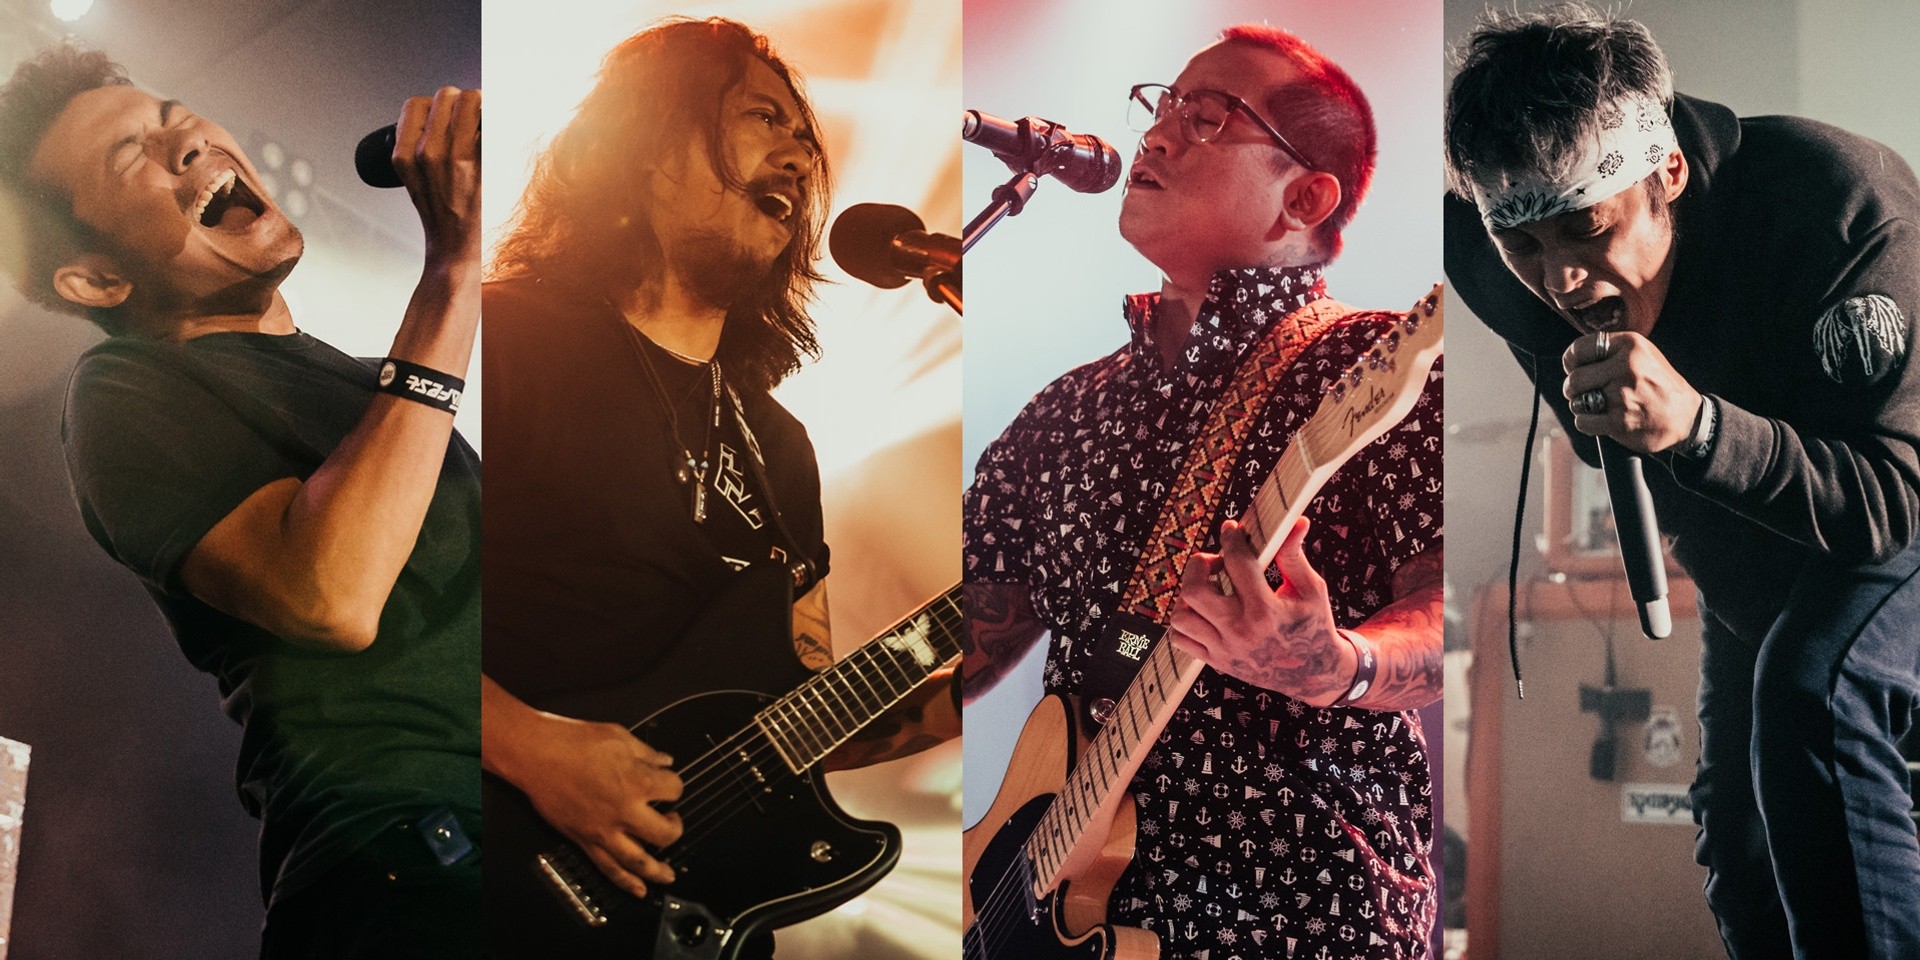 Threadfest closes 2019 with explosive performances by Salamin, Typecast, Urbandub, and more – photo gallery